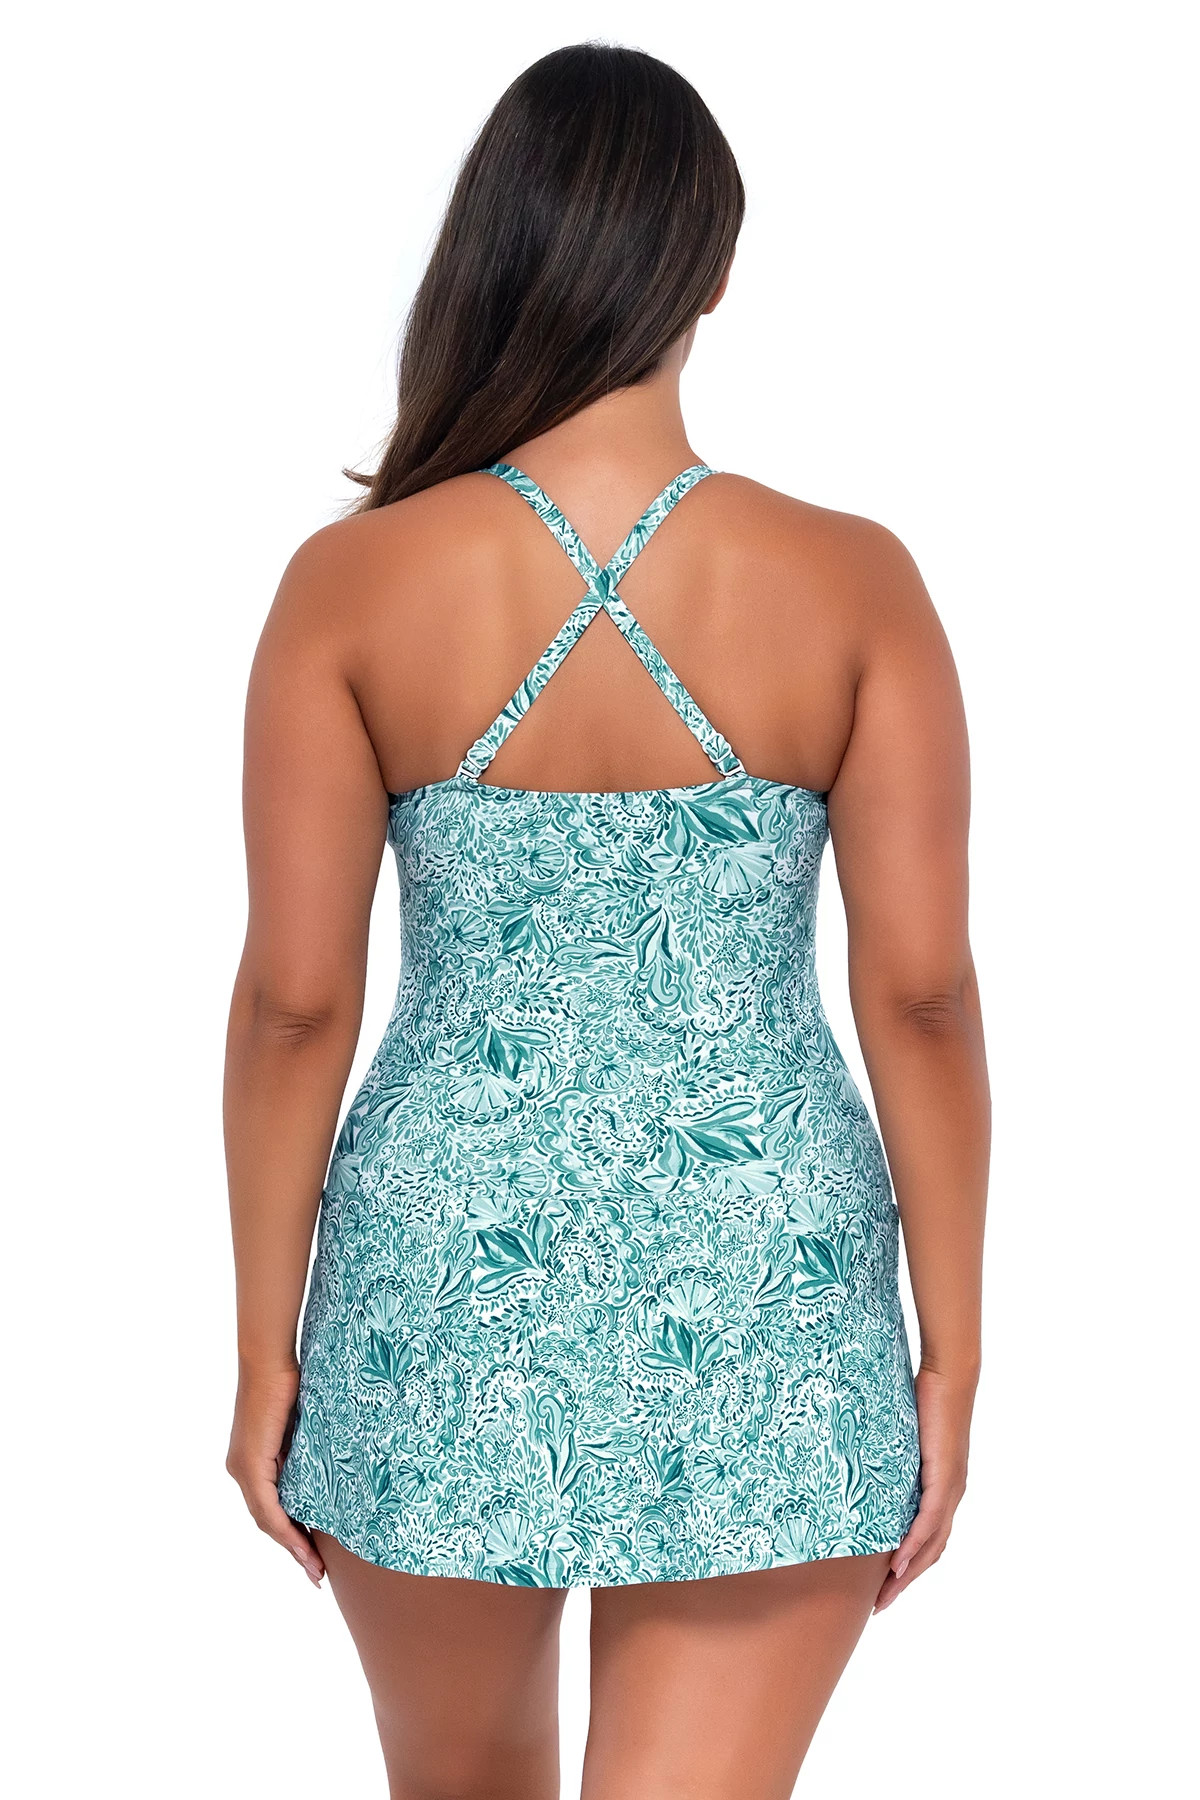 BY THE SEA Sienna Swim Dress image number 3